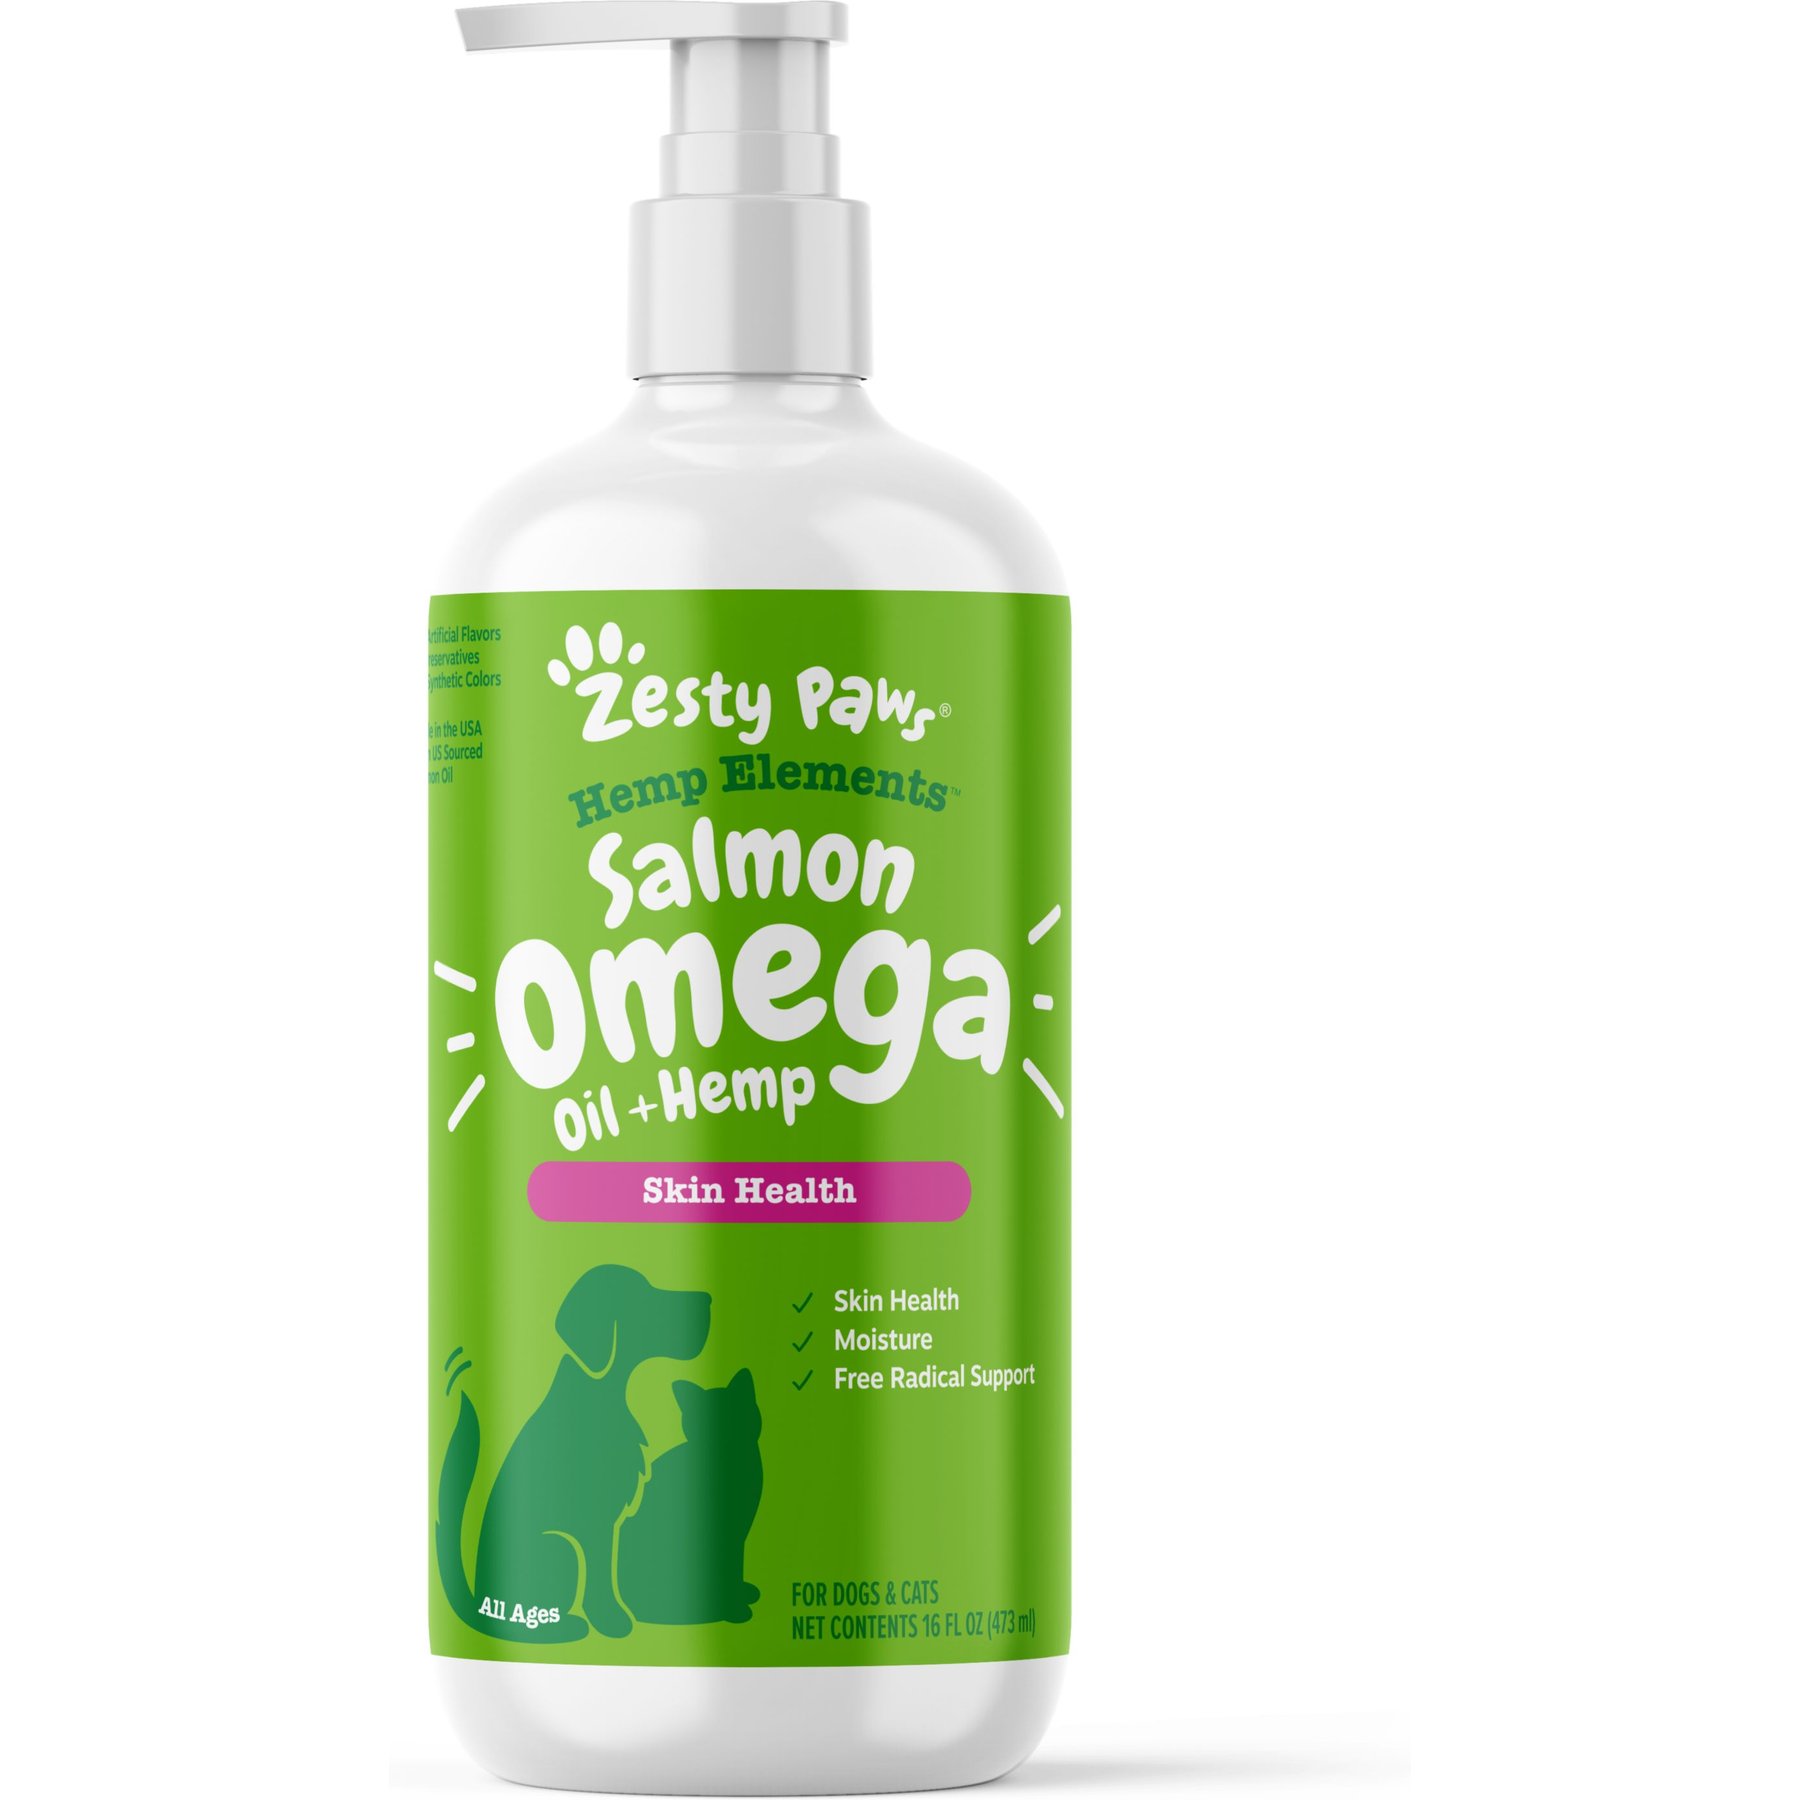  Pet Wellbeing Wild Alaskan Salmon Oil for Dogs & Cats - Daily  Omega-3 for Healthy Skin, Coat, Mobility, Joints, Heart Health - EPA, DHA -  16 fl oz (473 ml) : Pet Supplies